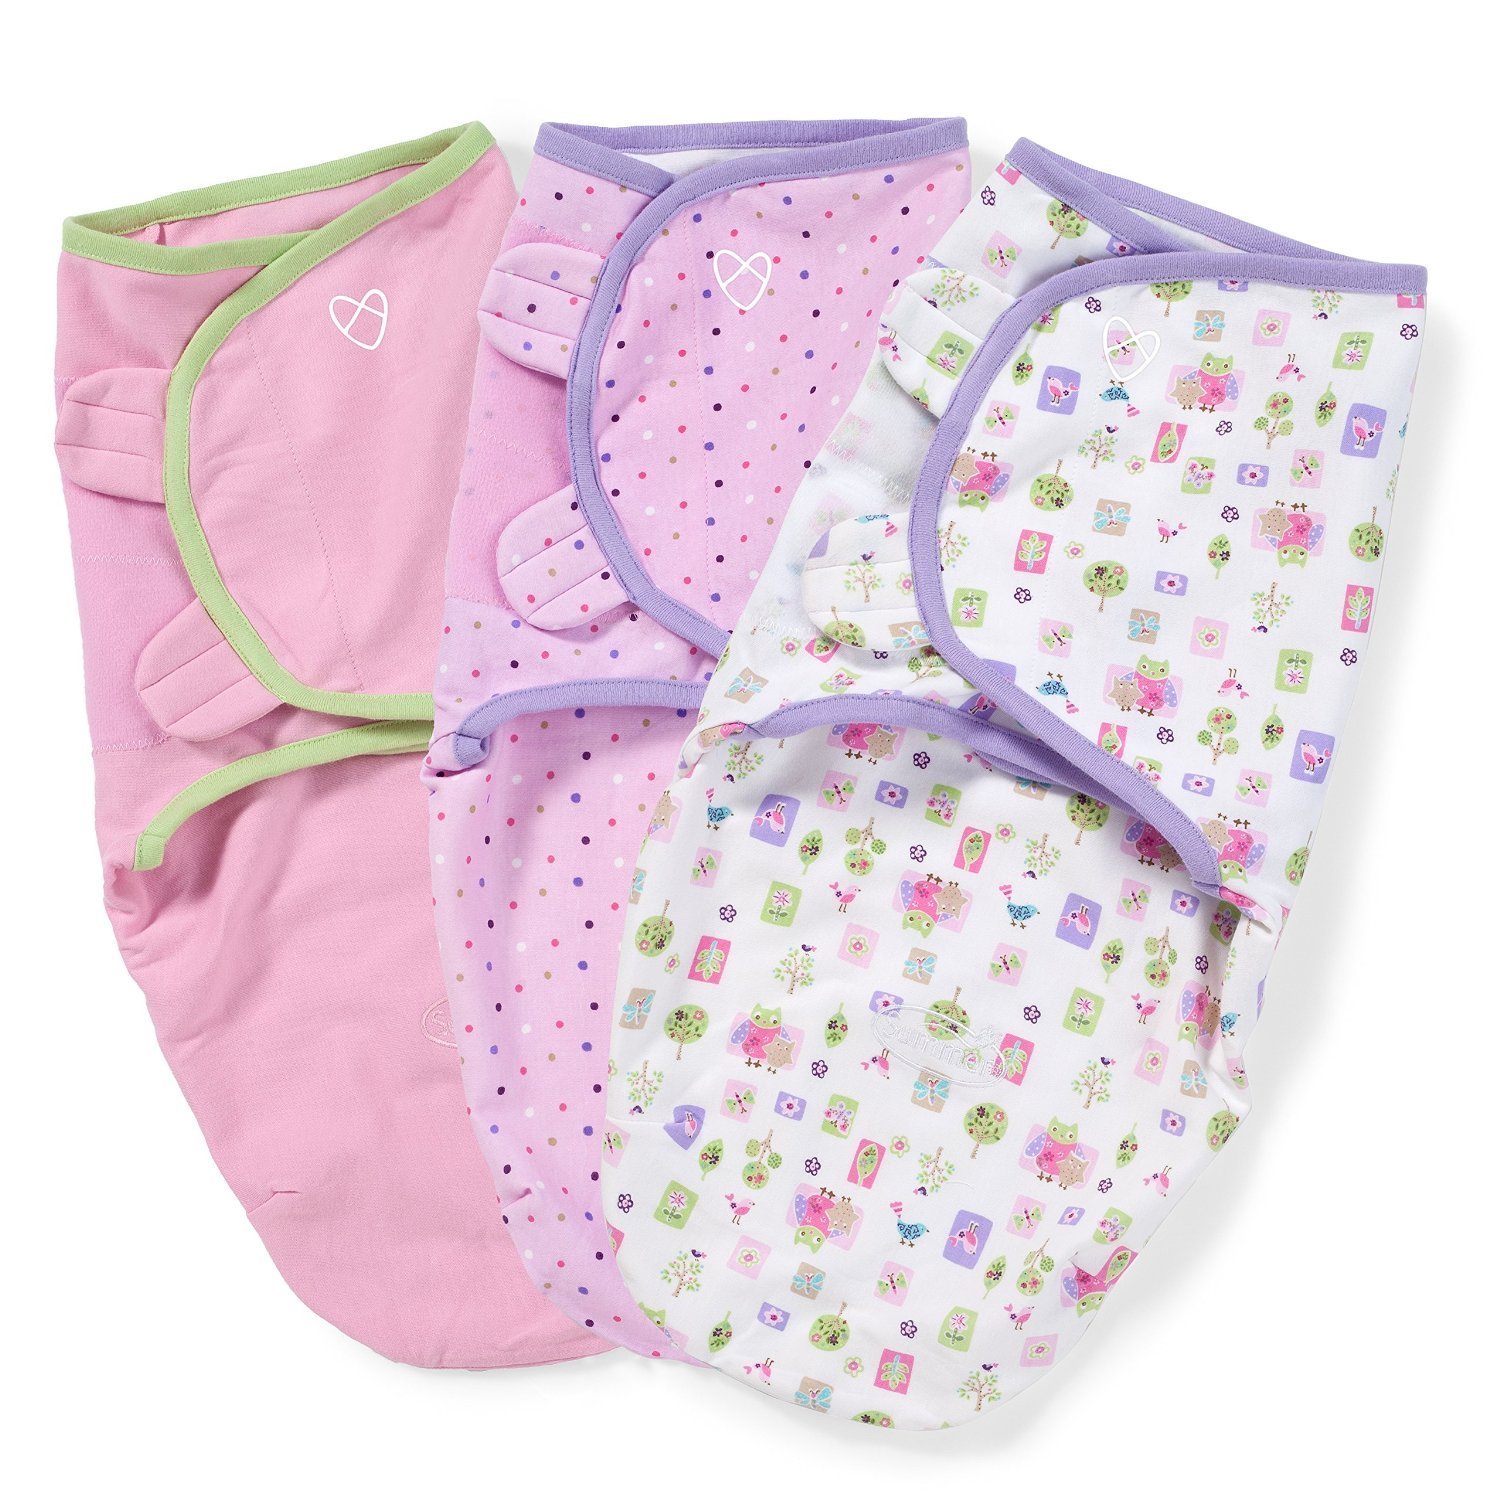 SwaddleMe Original Swaddle – Size Small/Medium, 0-3 Months, 3-Pack (Who Loves You) - image 1 of 4